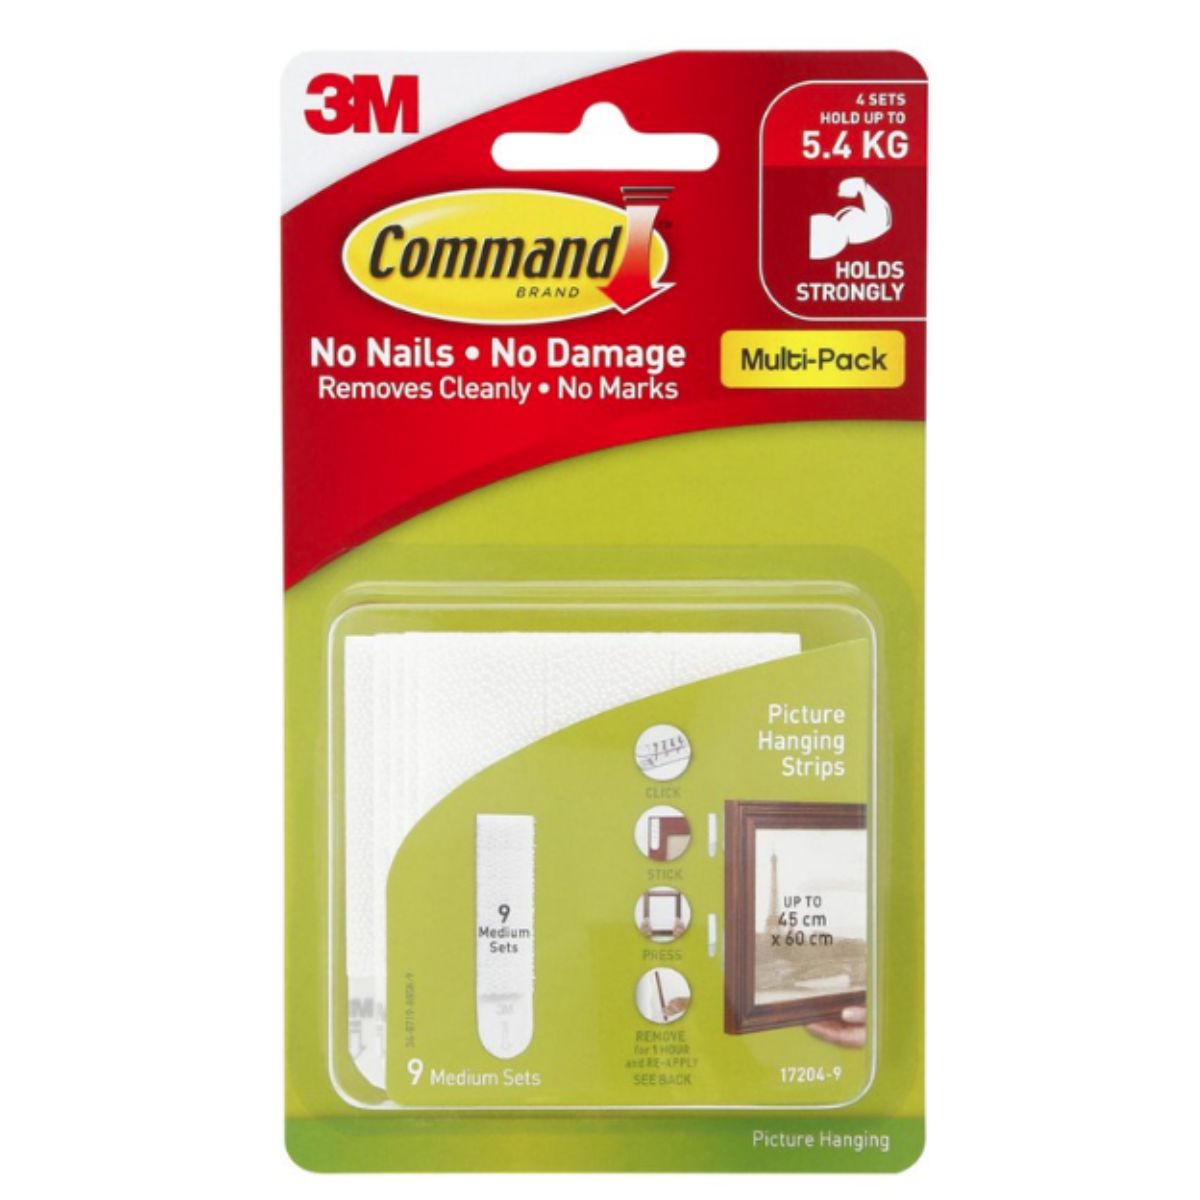 3M Command Medium Picture Hanging Strips Value Pack 9 Sets Medium Hold Up to 5.4 Kg